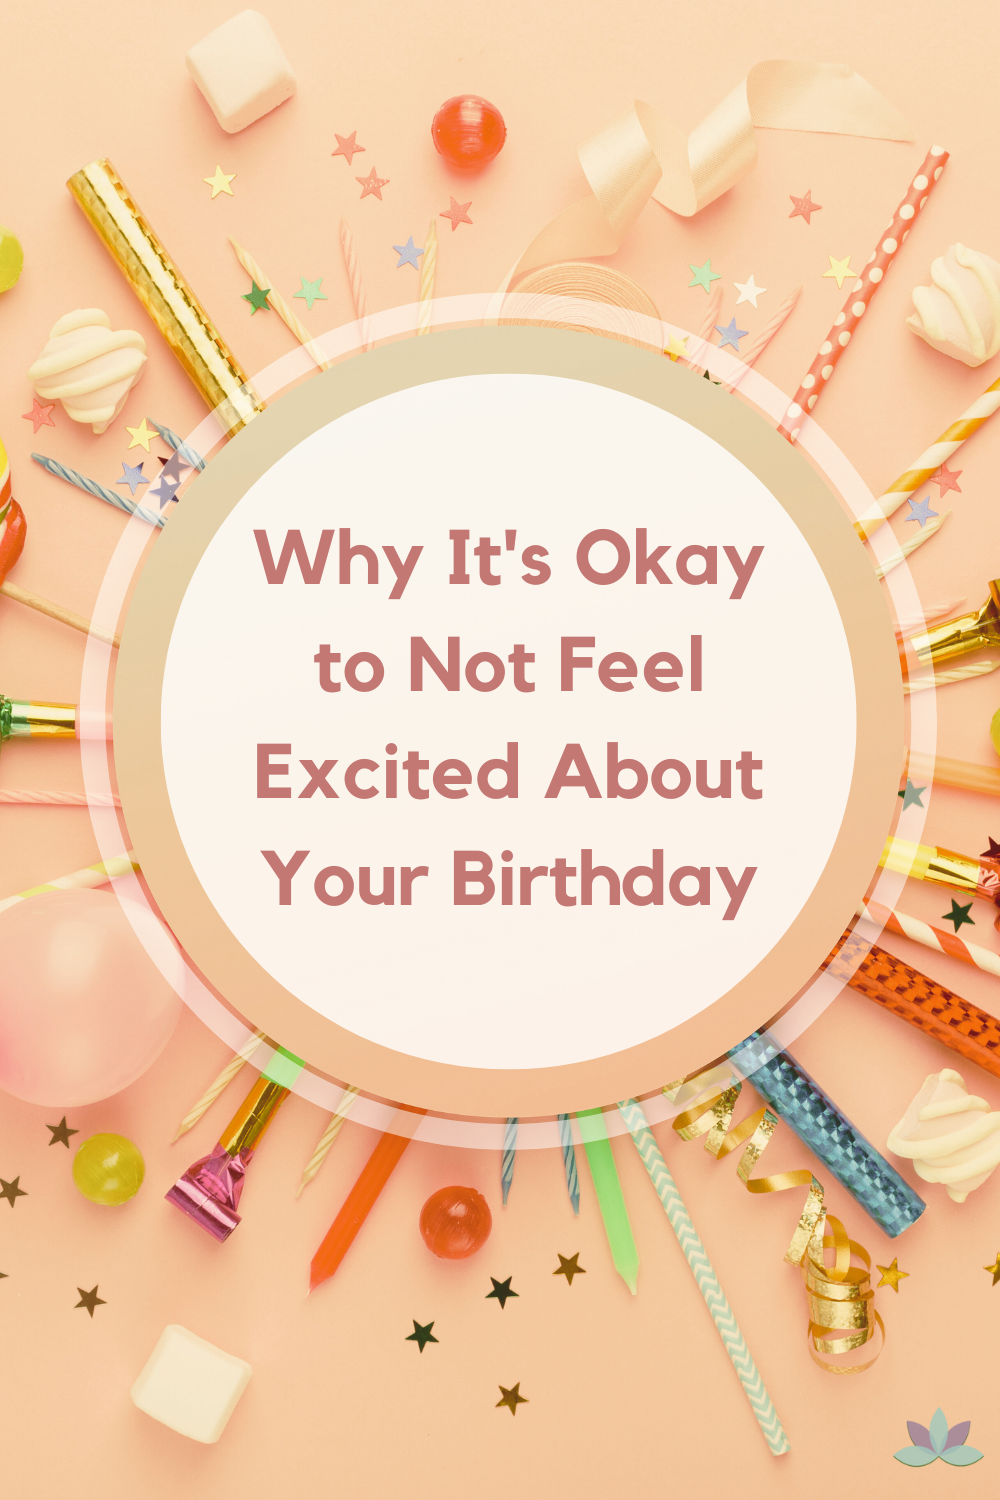 Why It's Okay to Not Feel Excited About Your Birthday